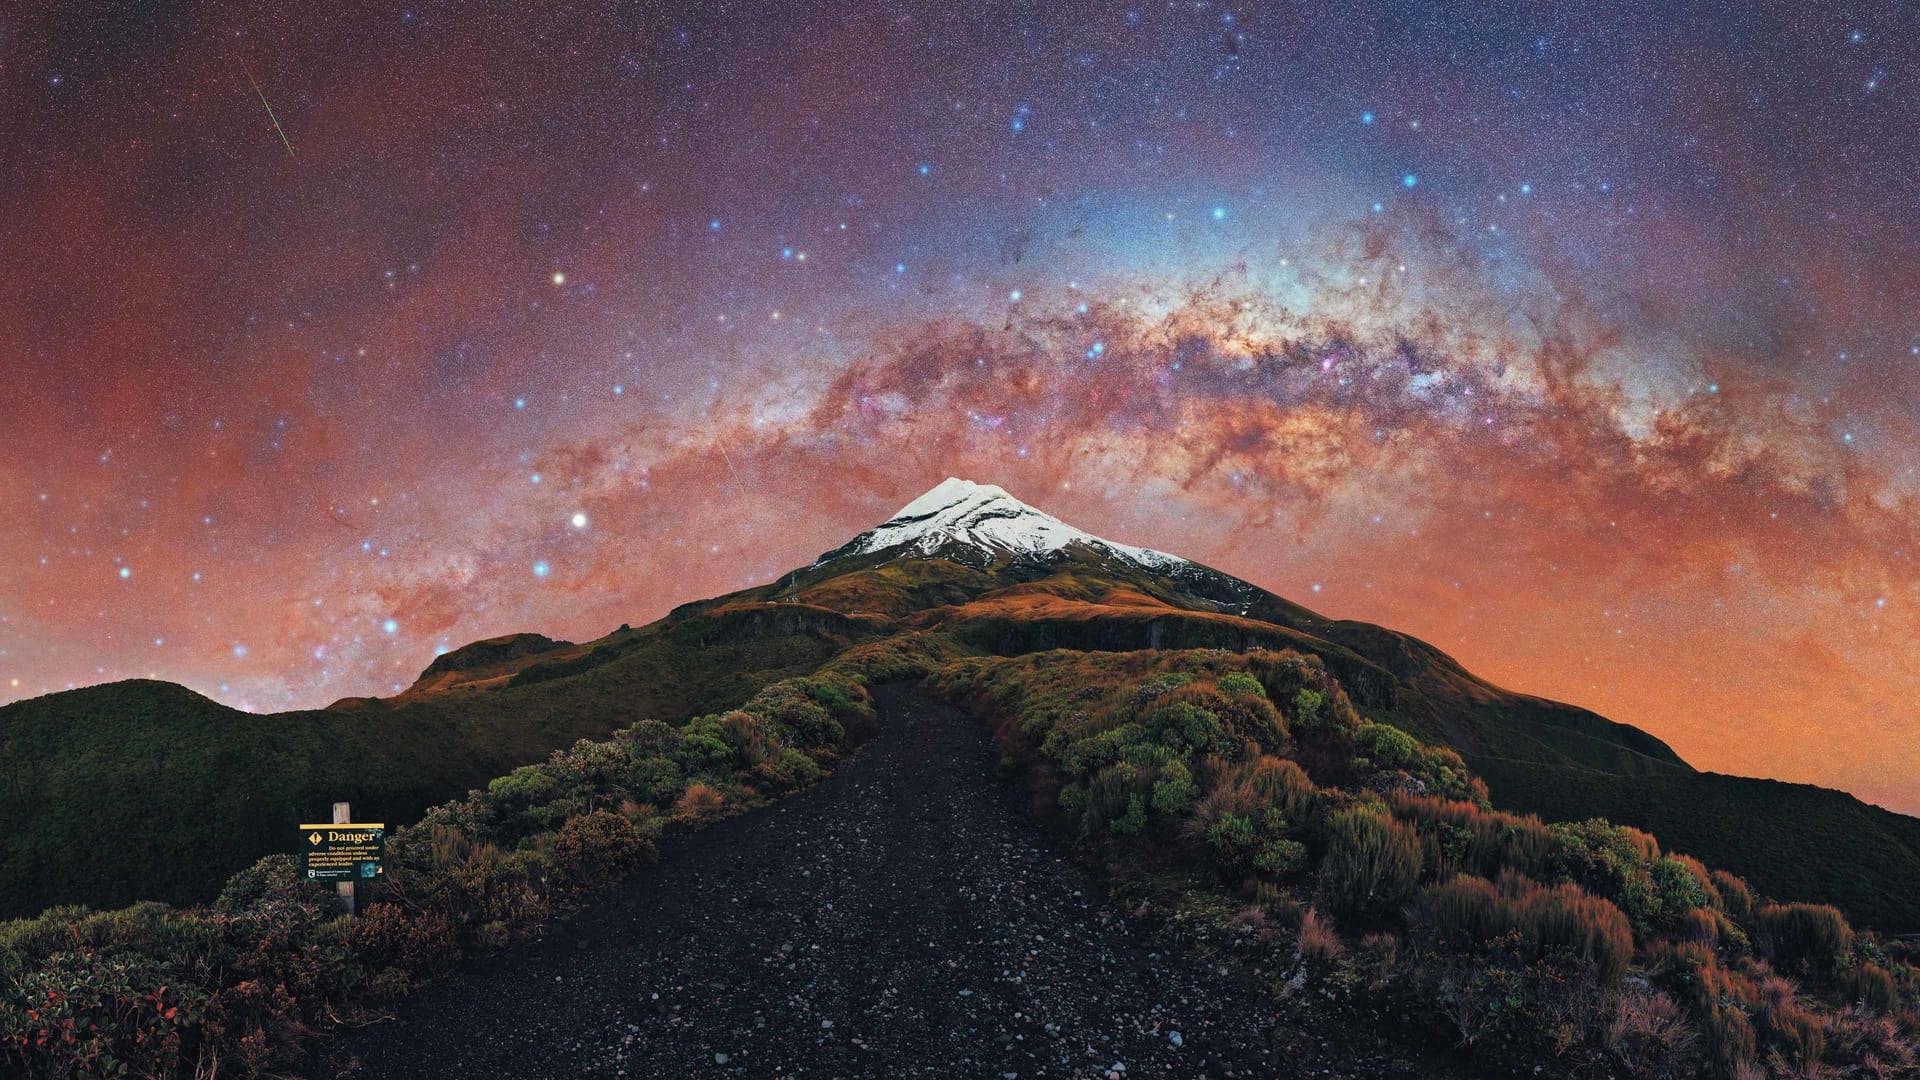 Milky Way photographer of the year New Zealand